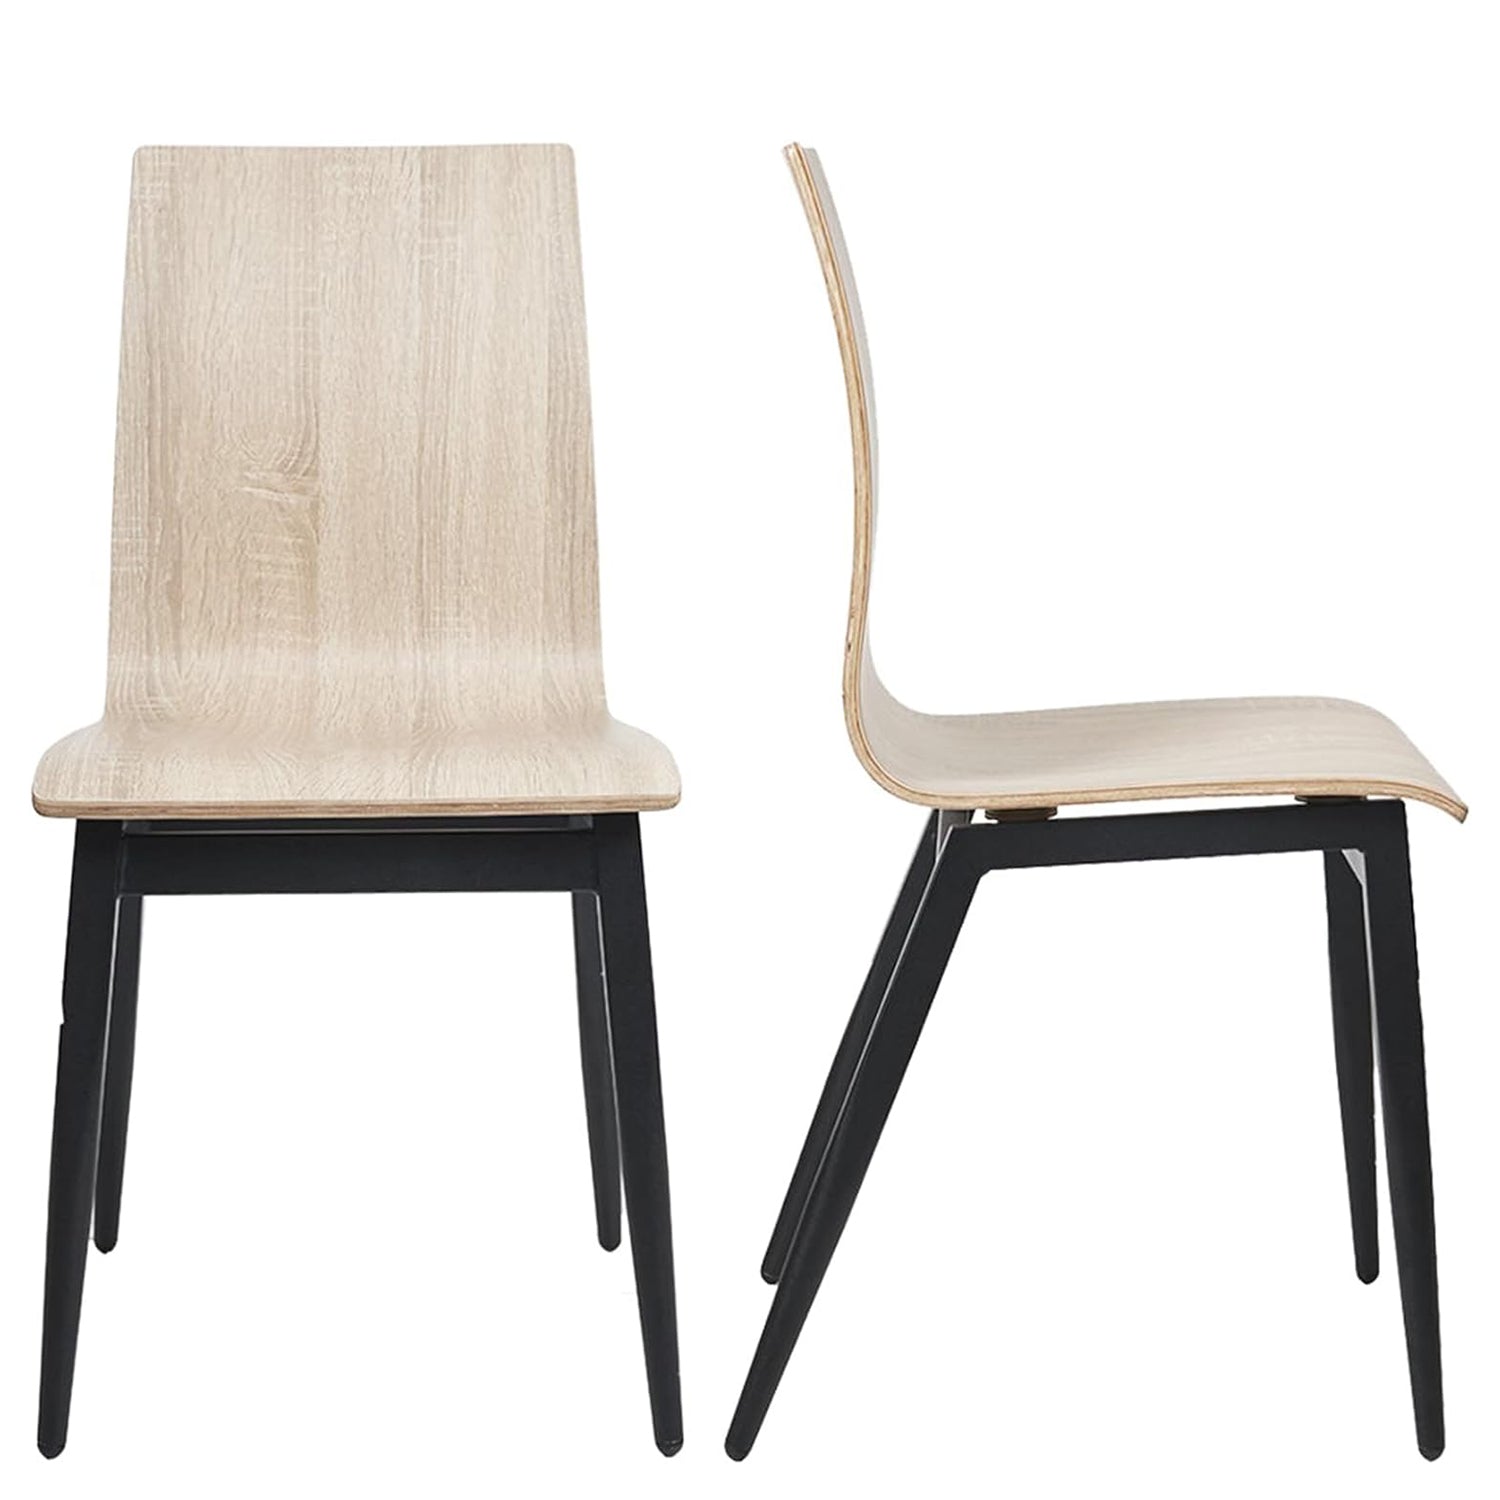 Set of 2 Modern Kitchen Chairs with Wooden Seat and Metal Legs Dining Side Chair, light Brown